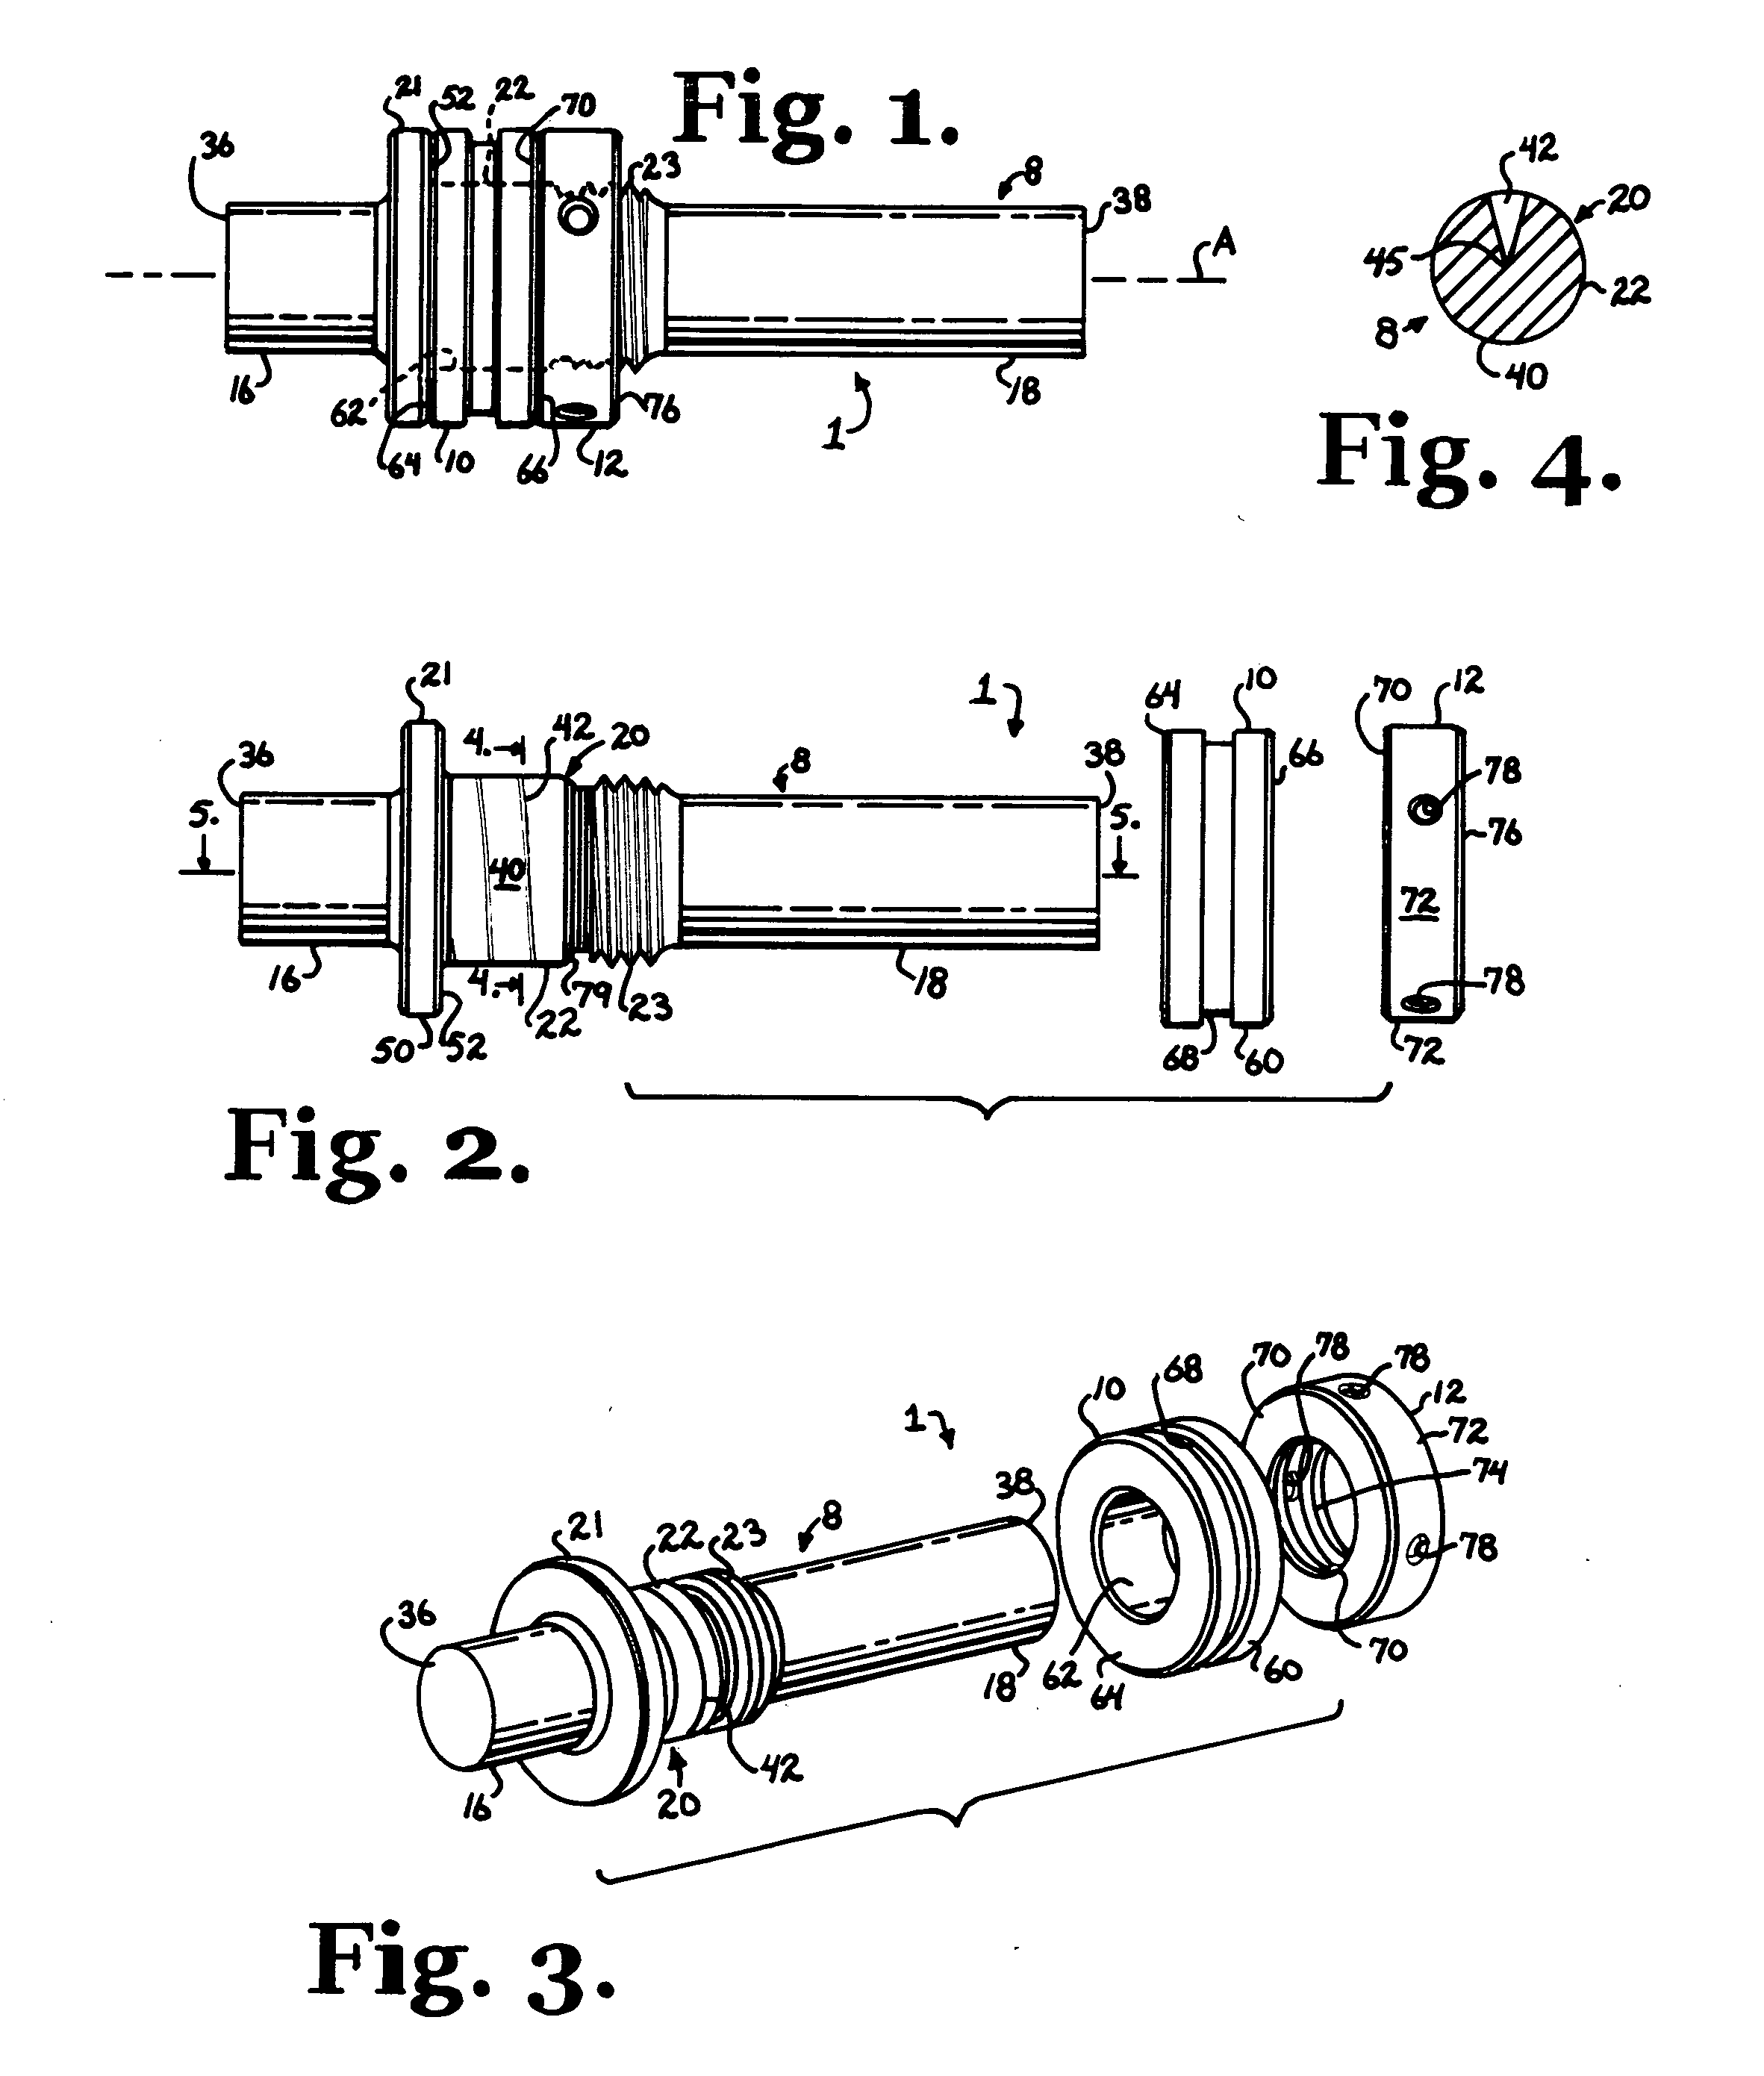 Dynamic stabilization connecting member with slitted segment and surrounding external elastomer